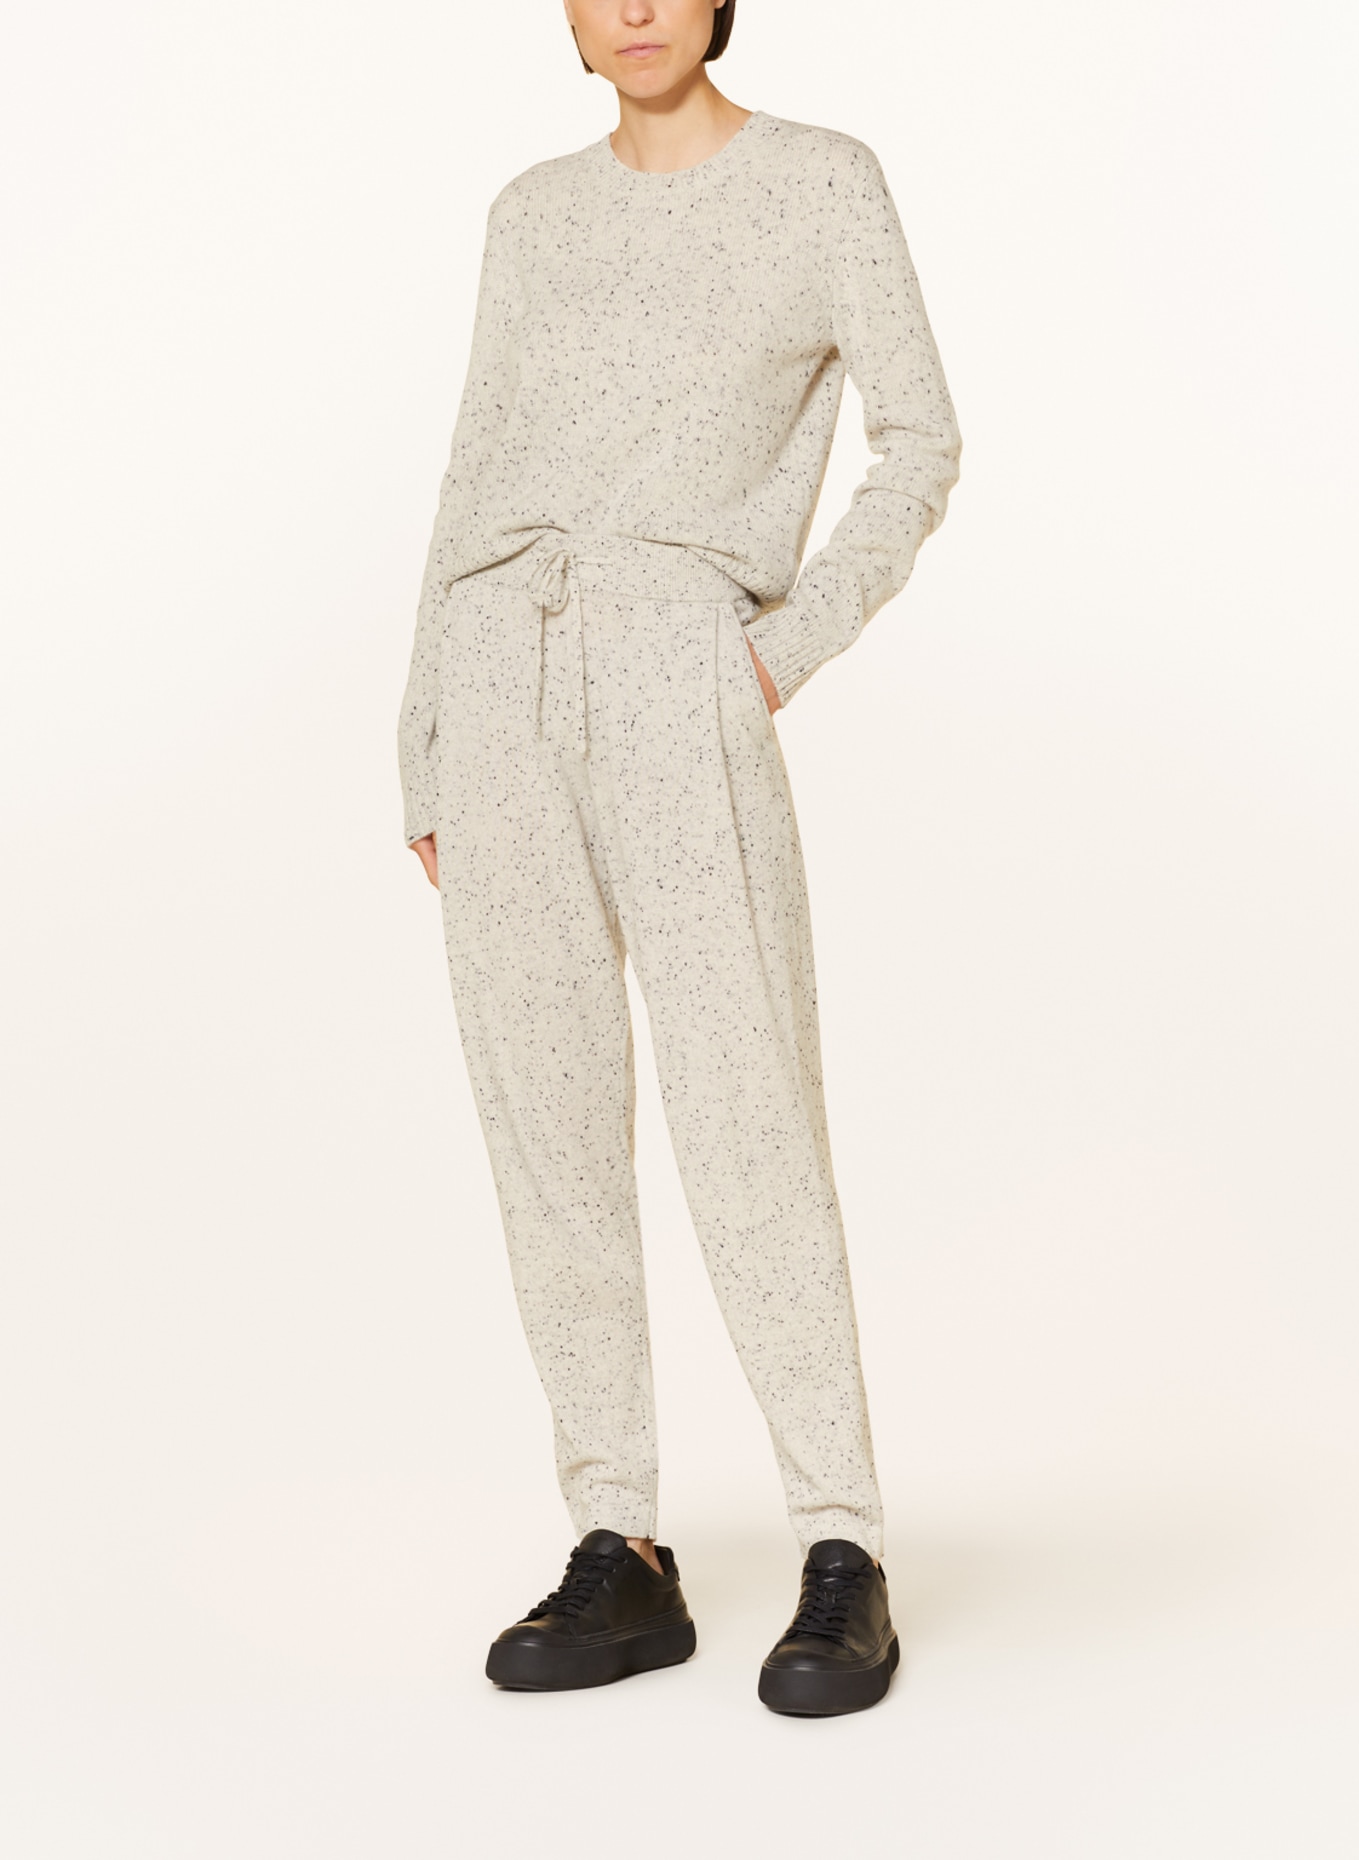 LISA YANG Knit trousers JO made of cashmere in jogger style, Color: LIGHT GRAY/ DARK GRAY (Image 2)